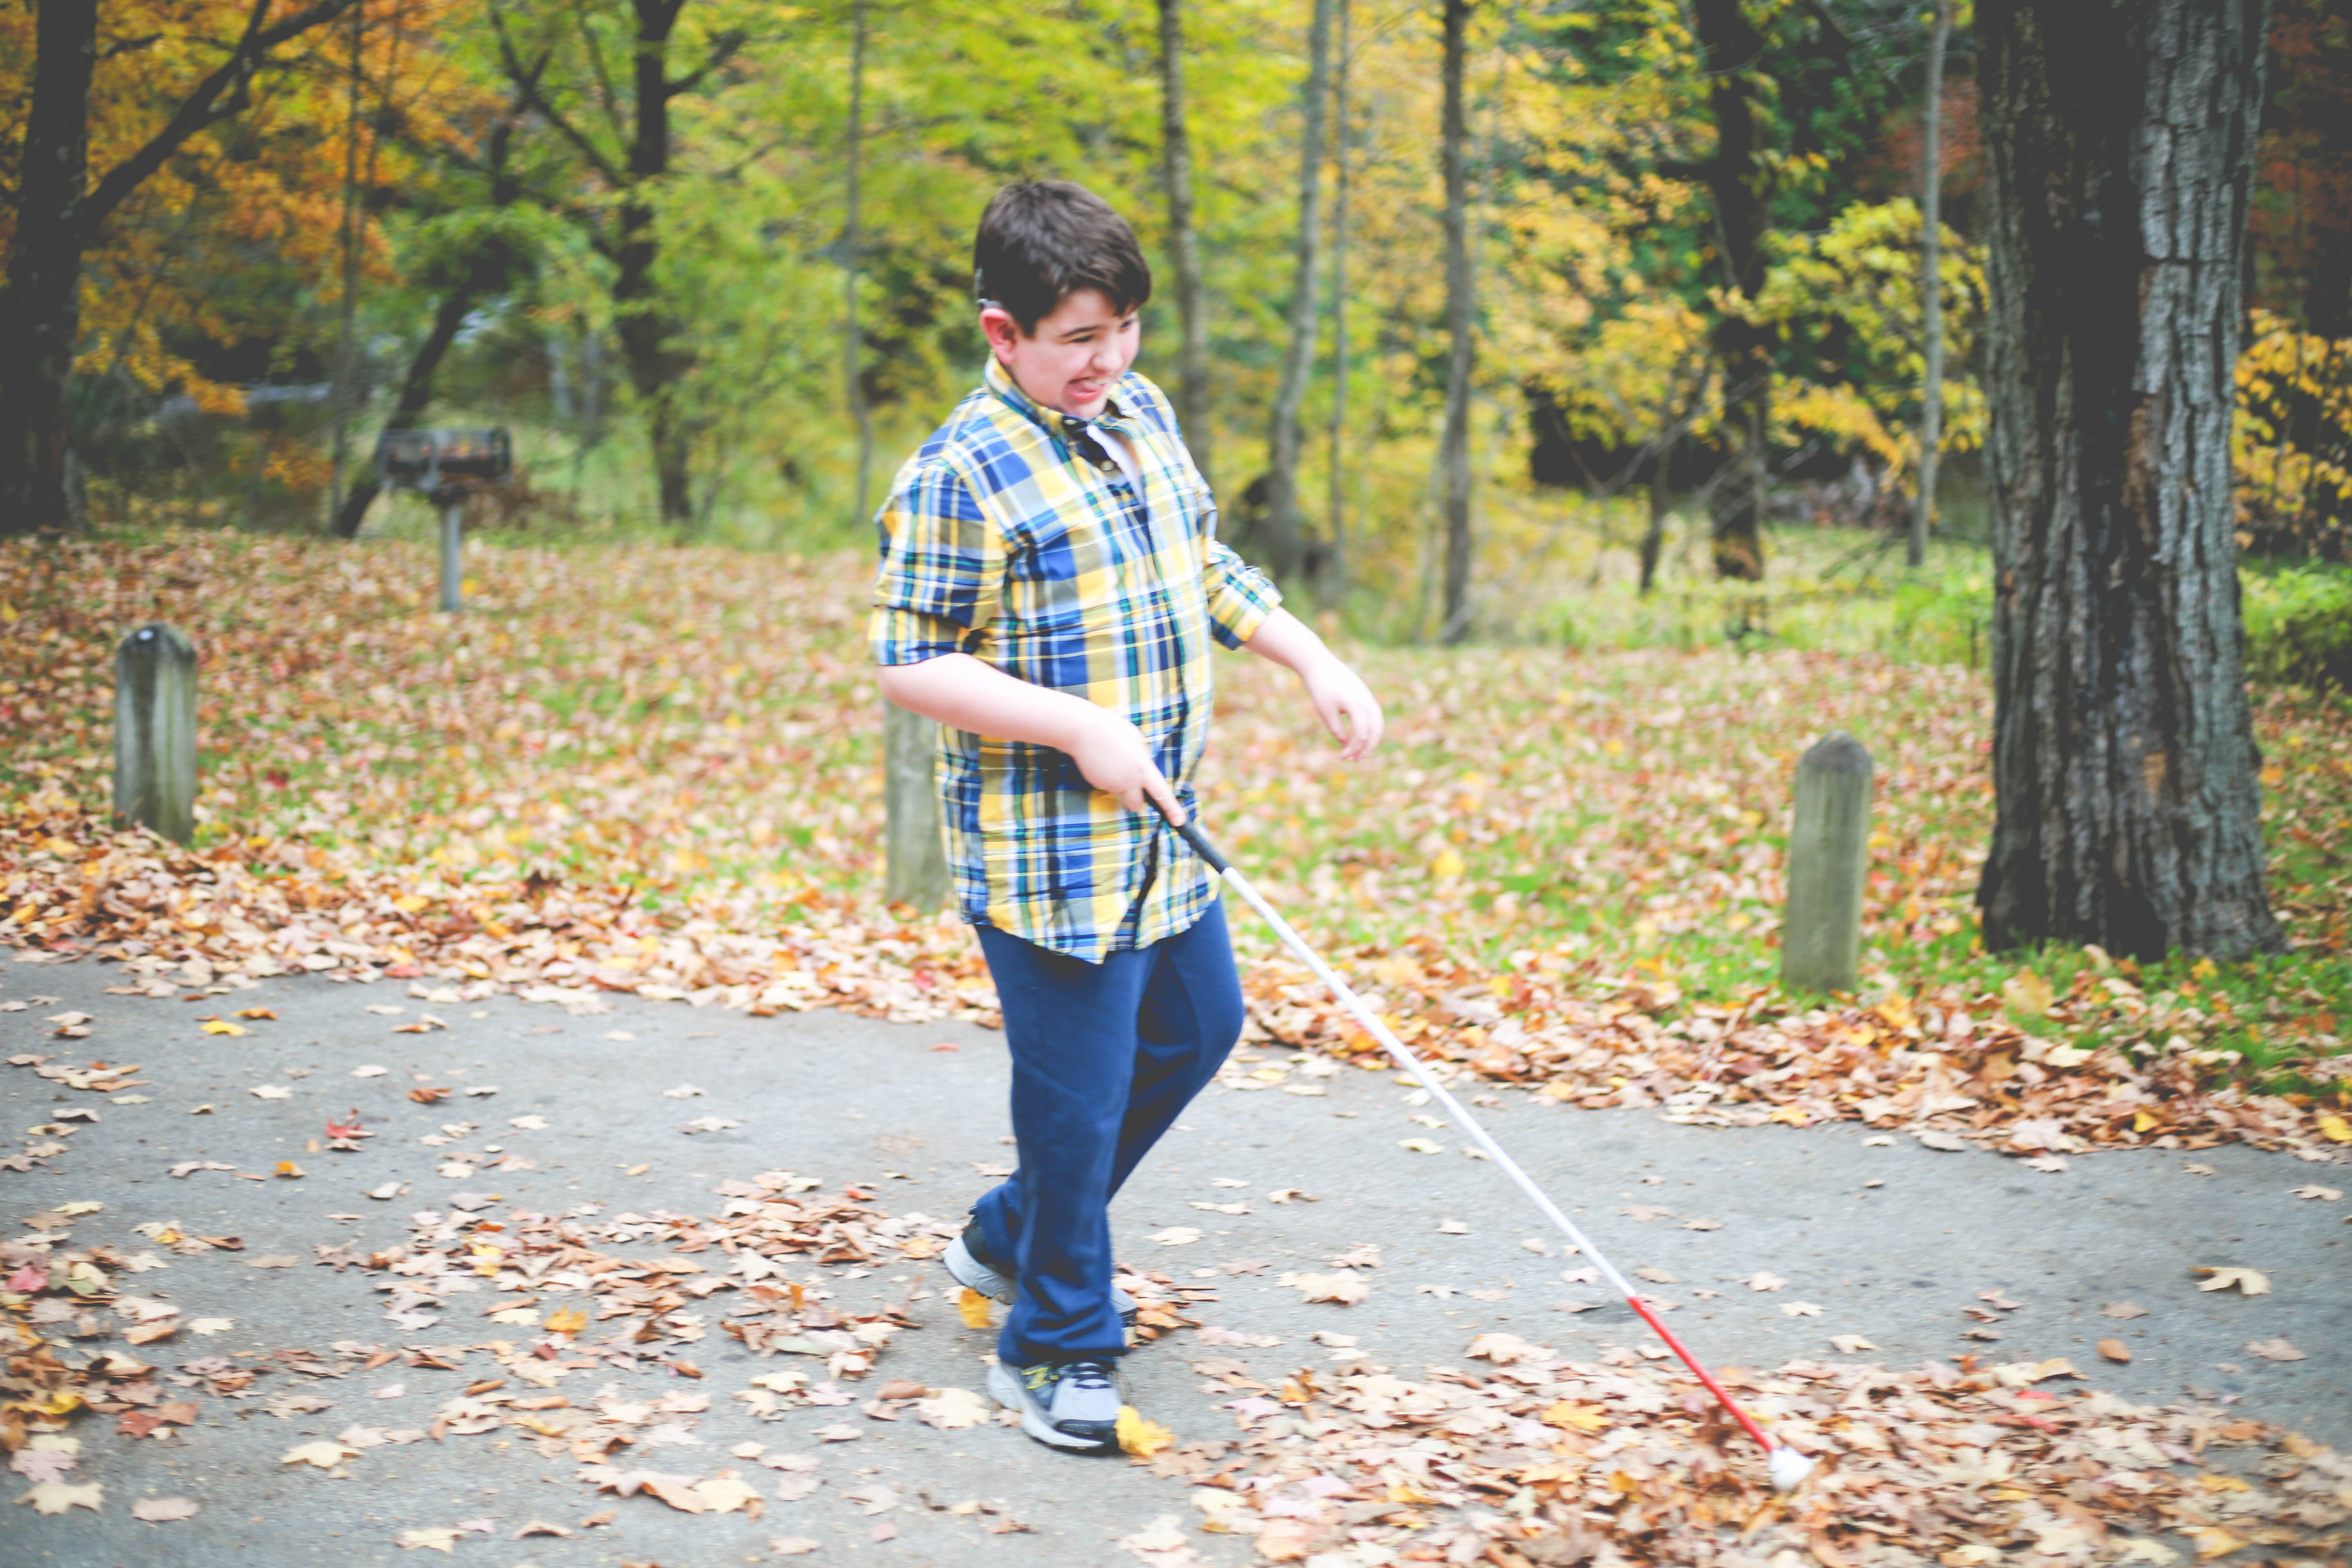 Liam walking with a cane next to a pile of leaves.